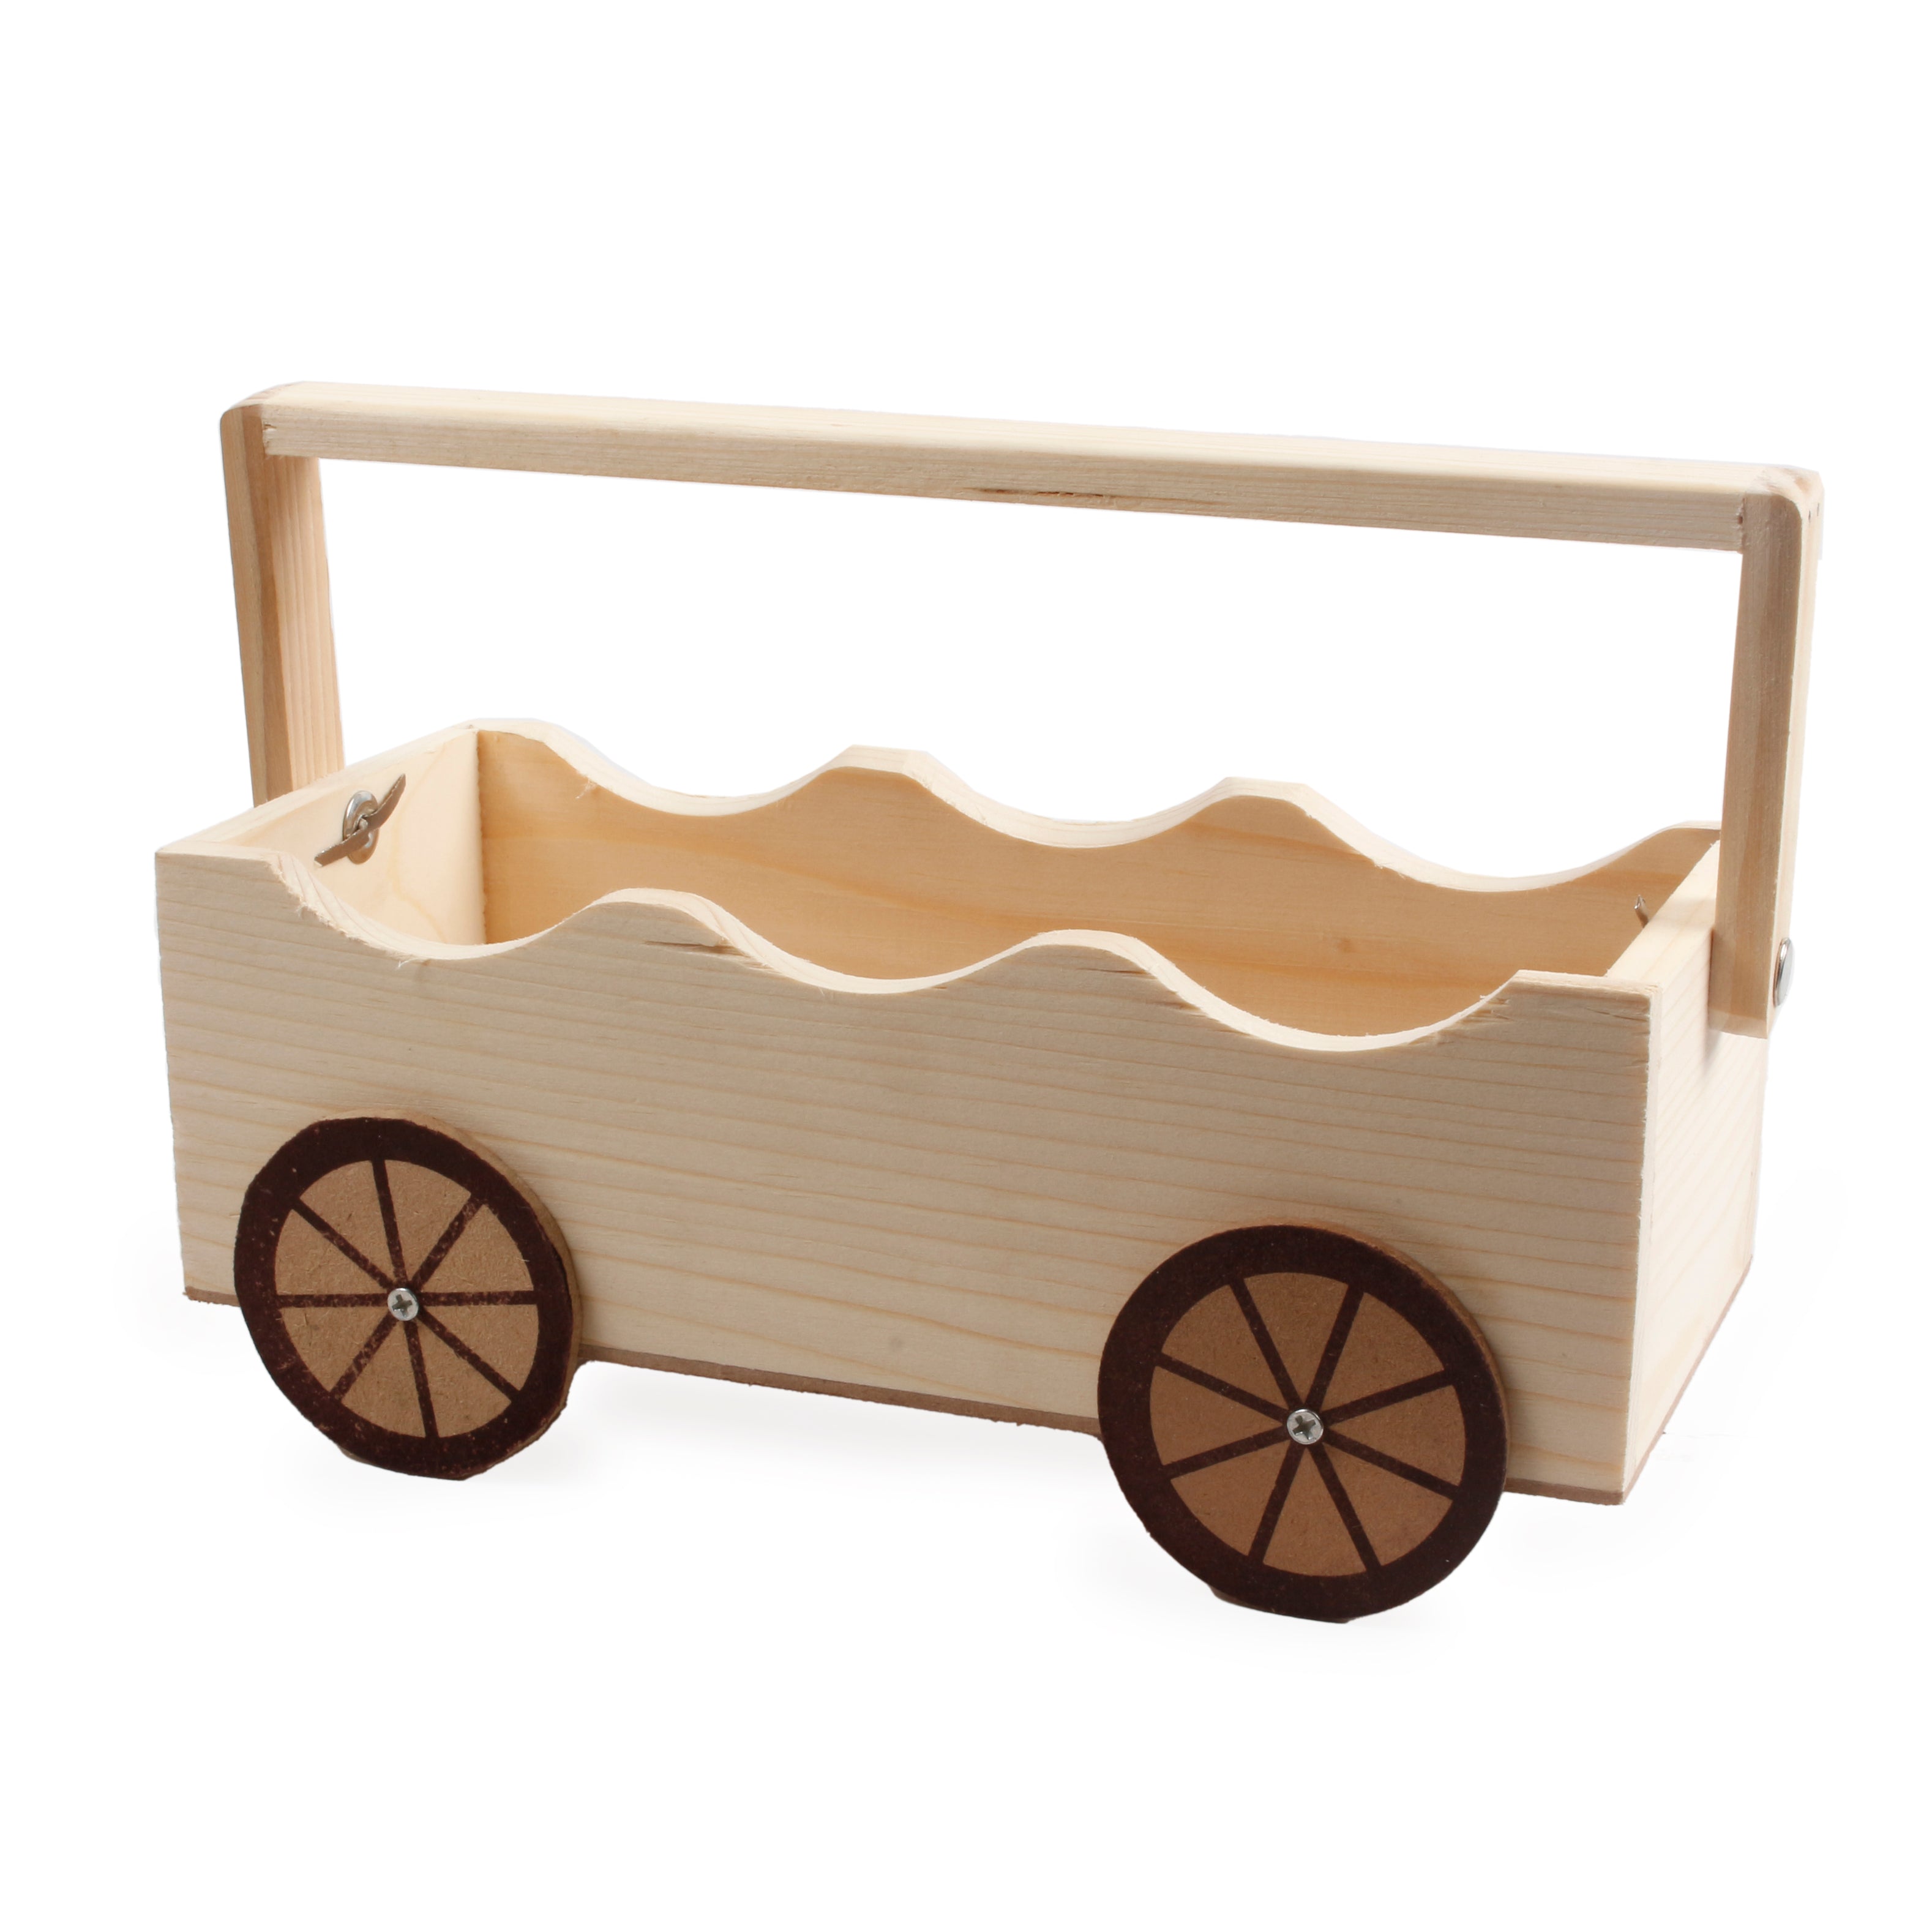 Wooden Cart Storage Tray With Moveable Wheels 4 X 9 X 3Inch 1Pc Ib